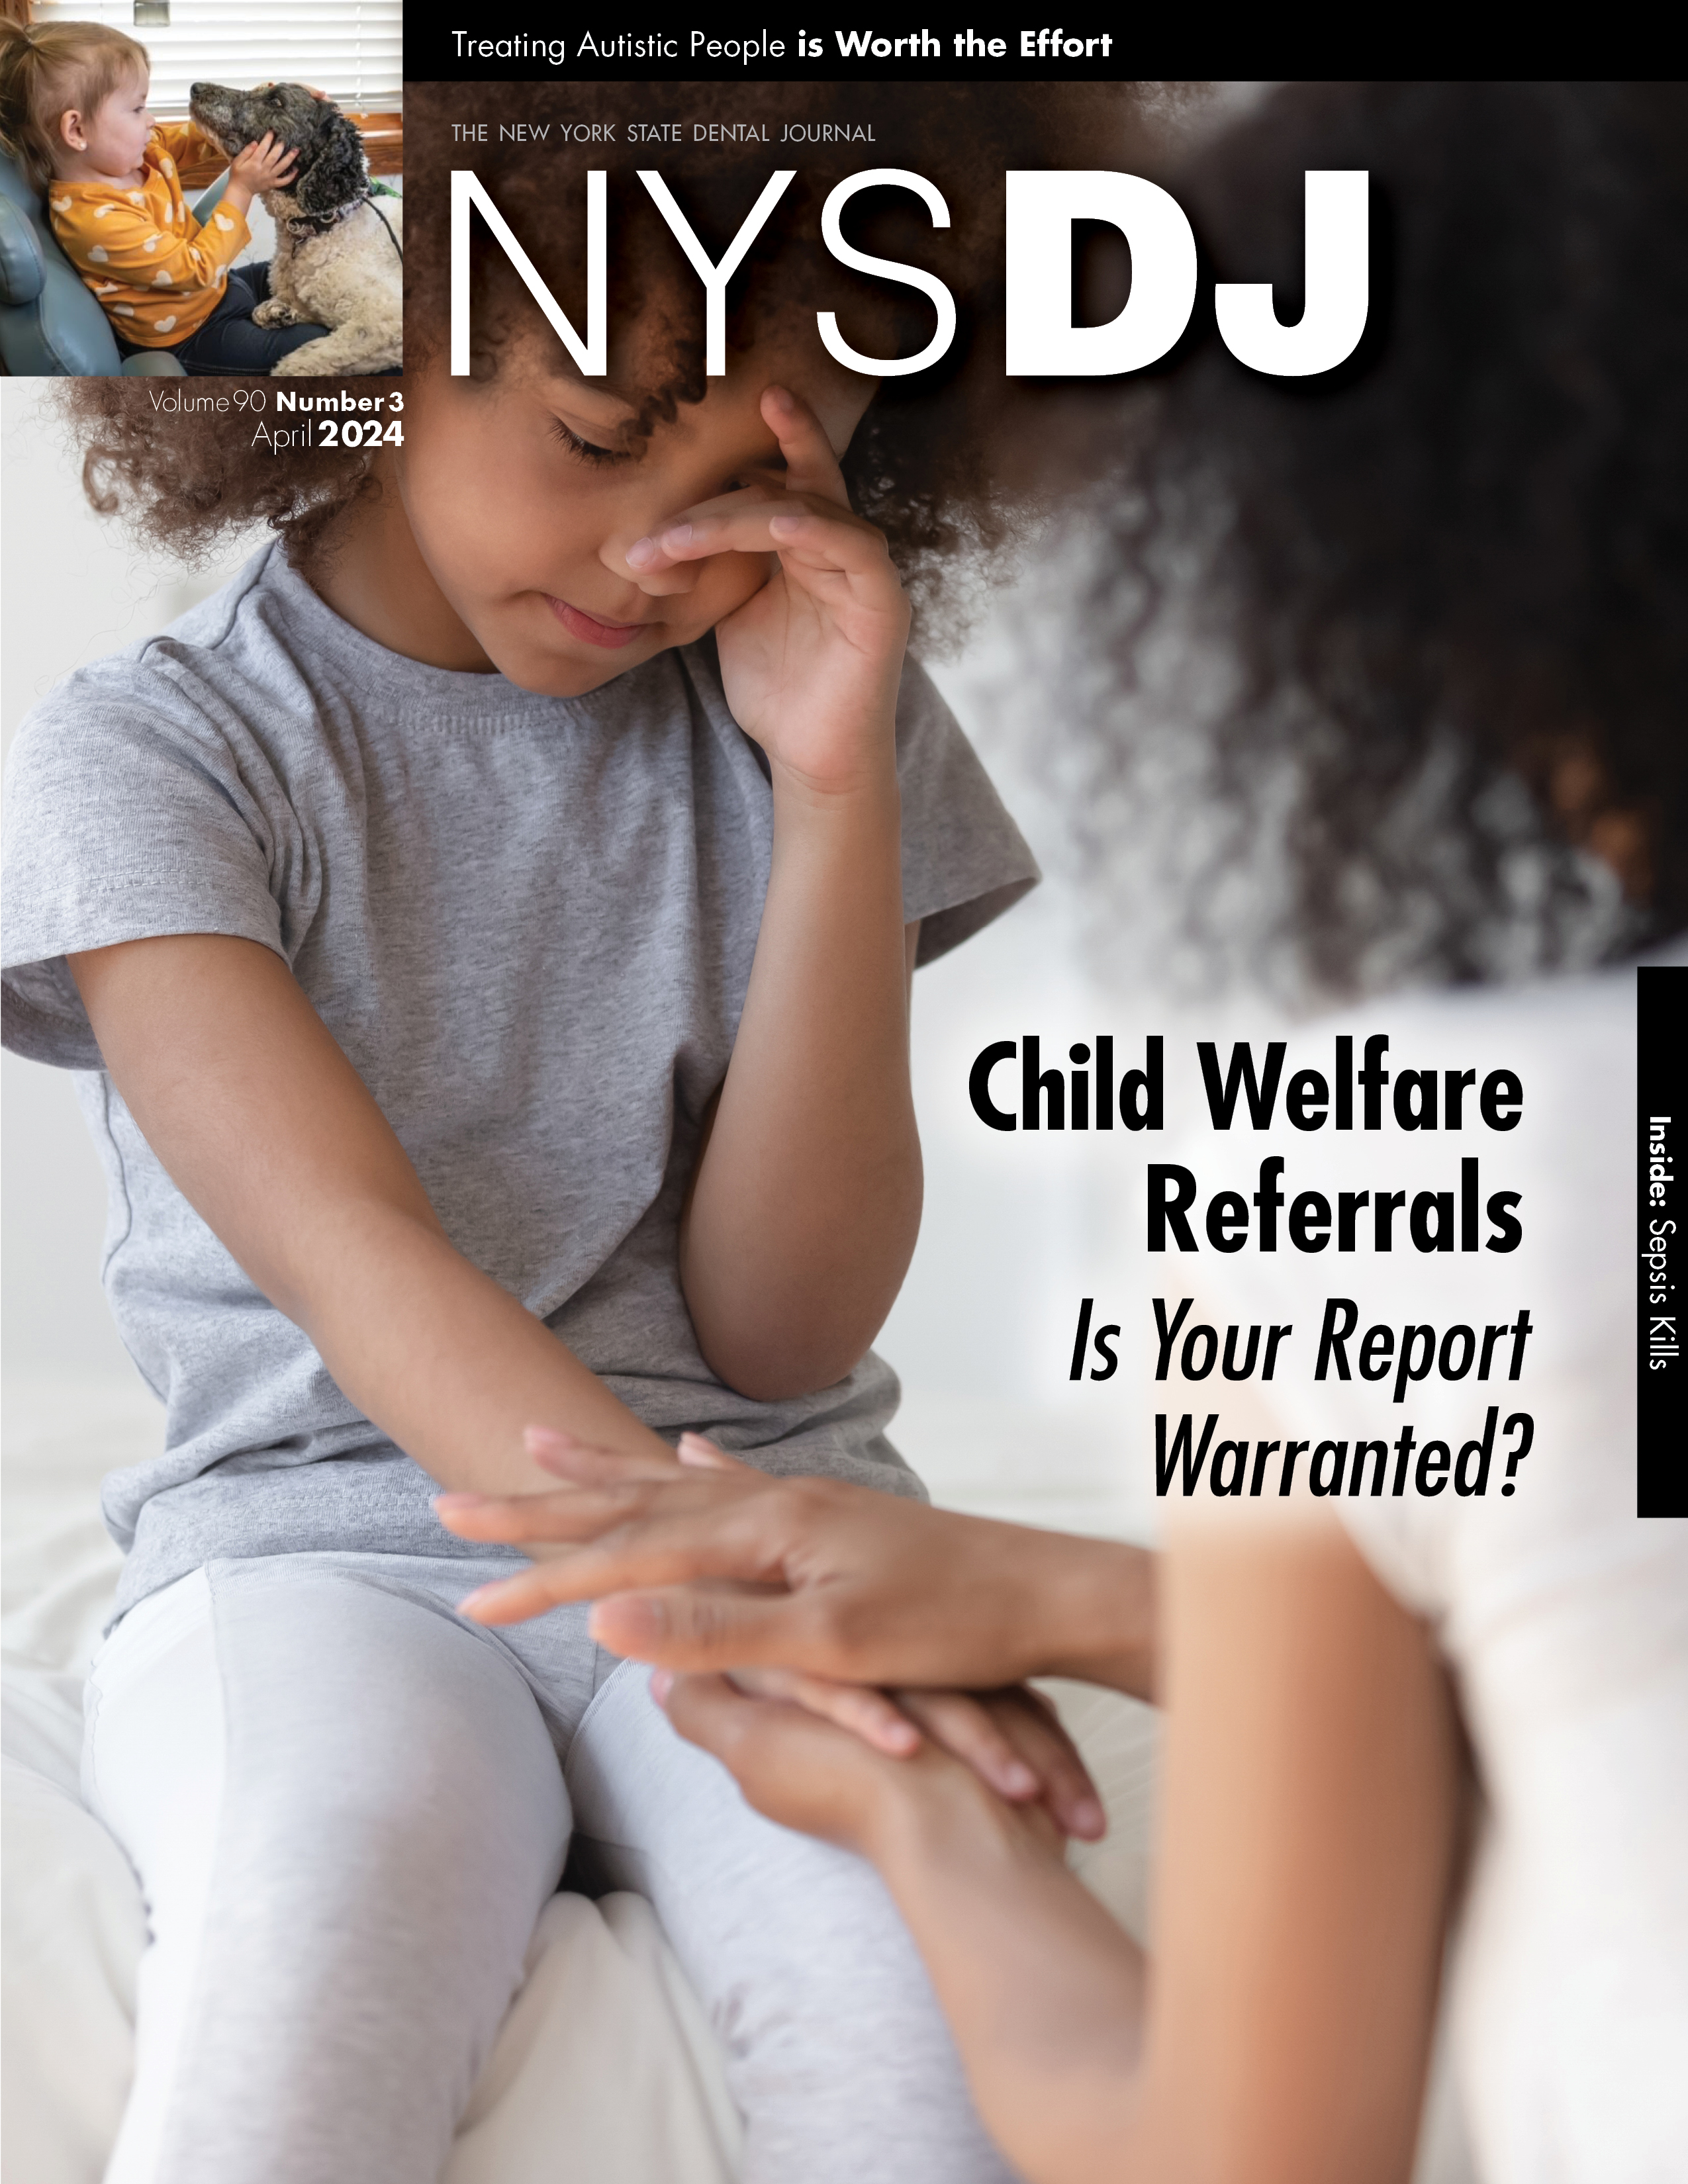 Cover of the NYSDJ with a sitting child holding the hand of an adult and rubbing their eyes.